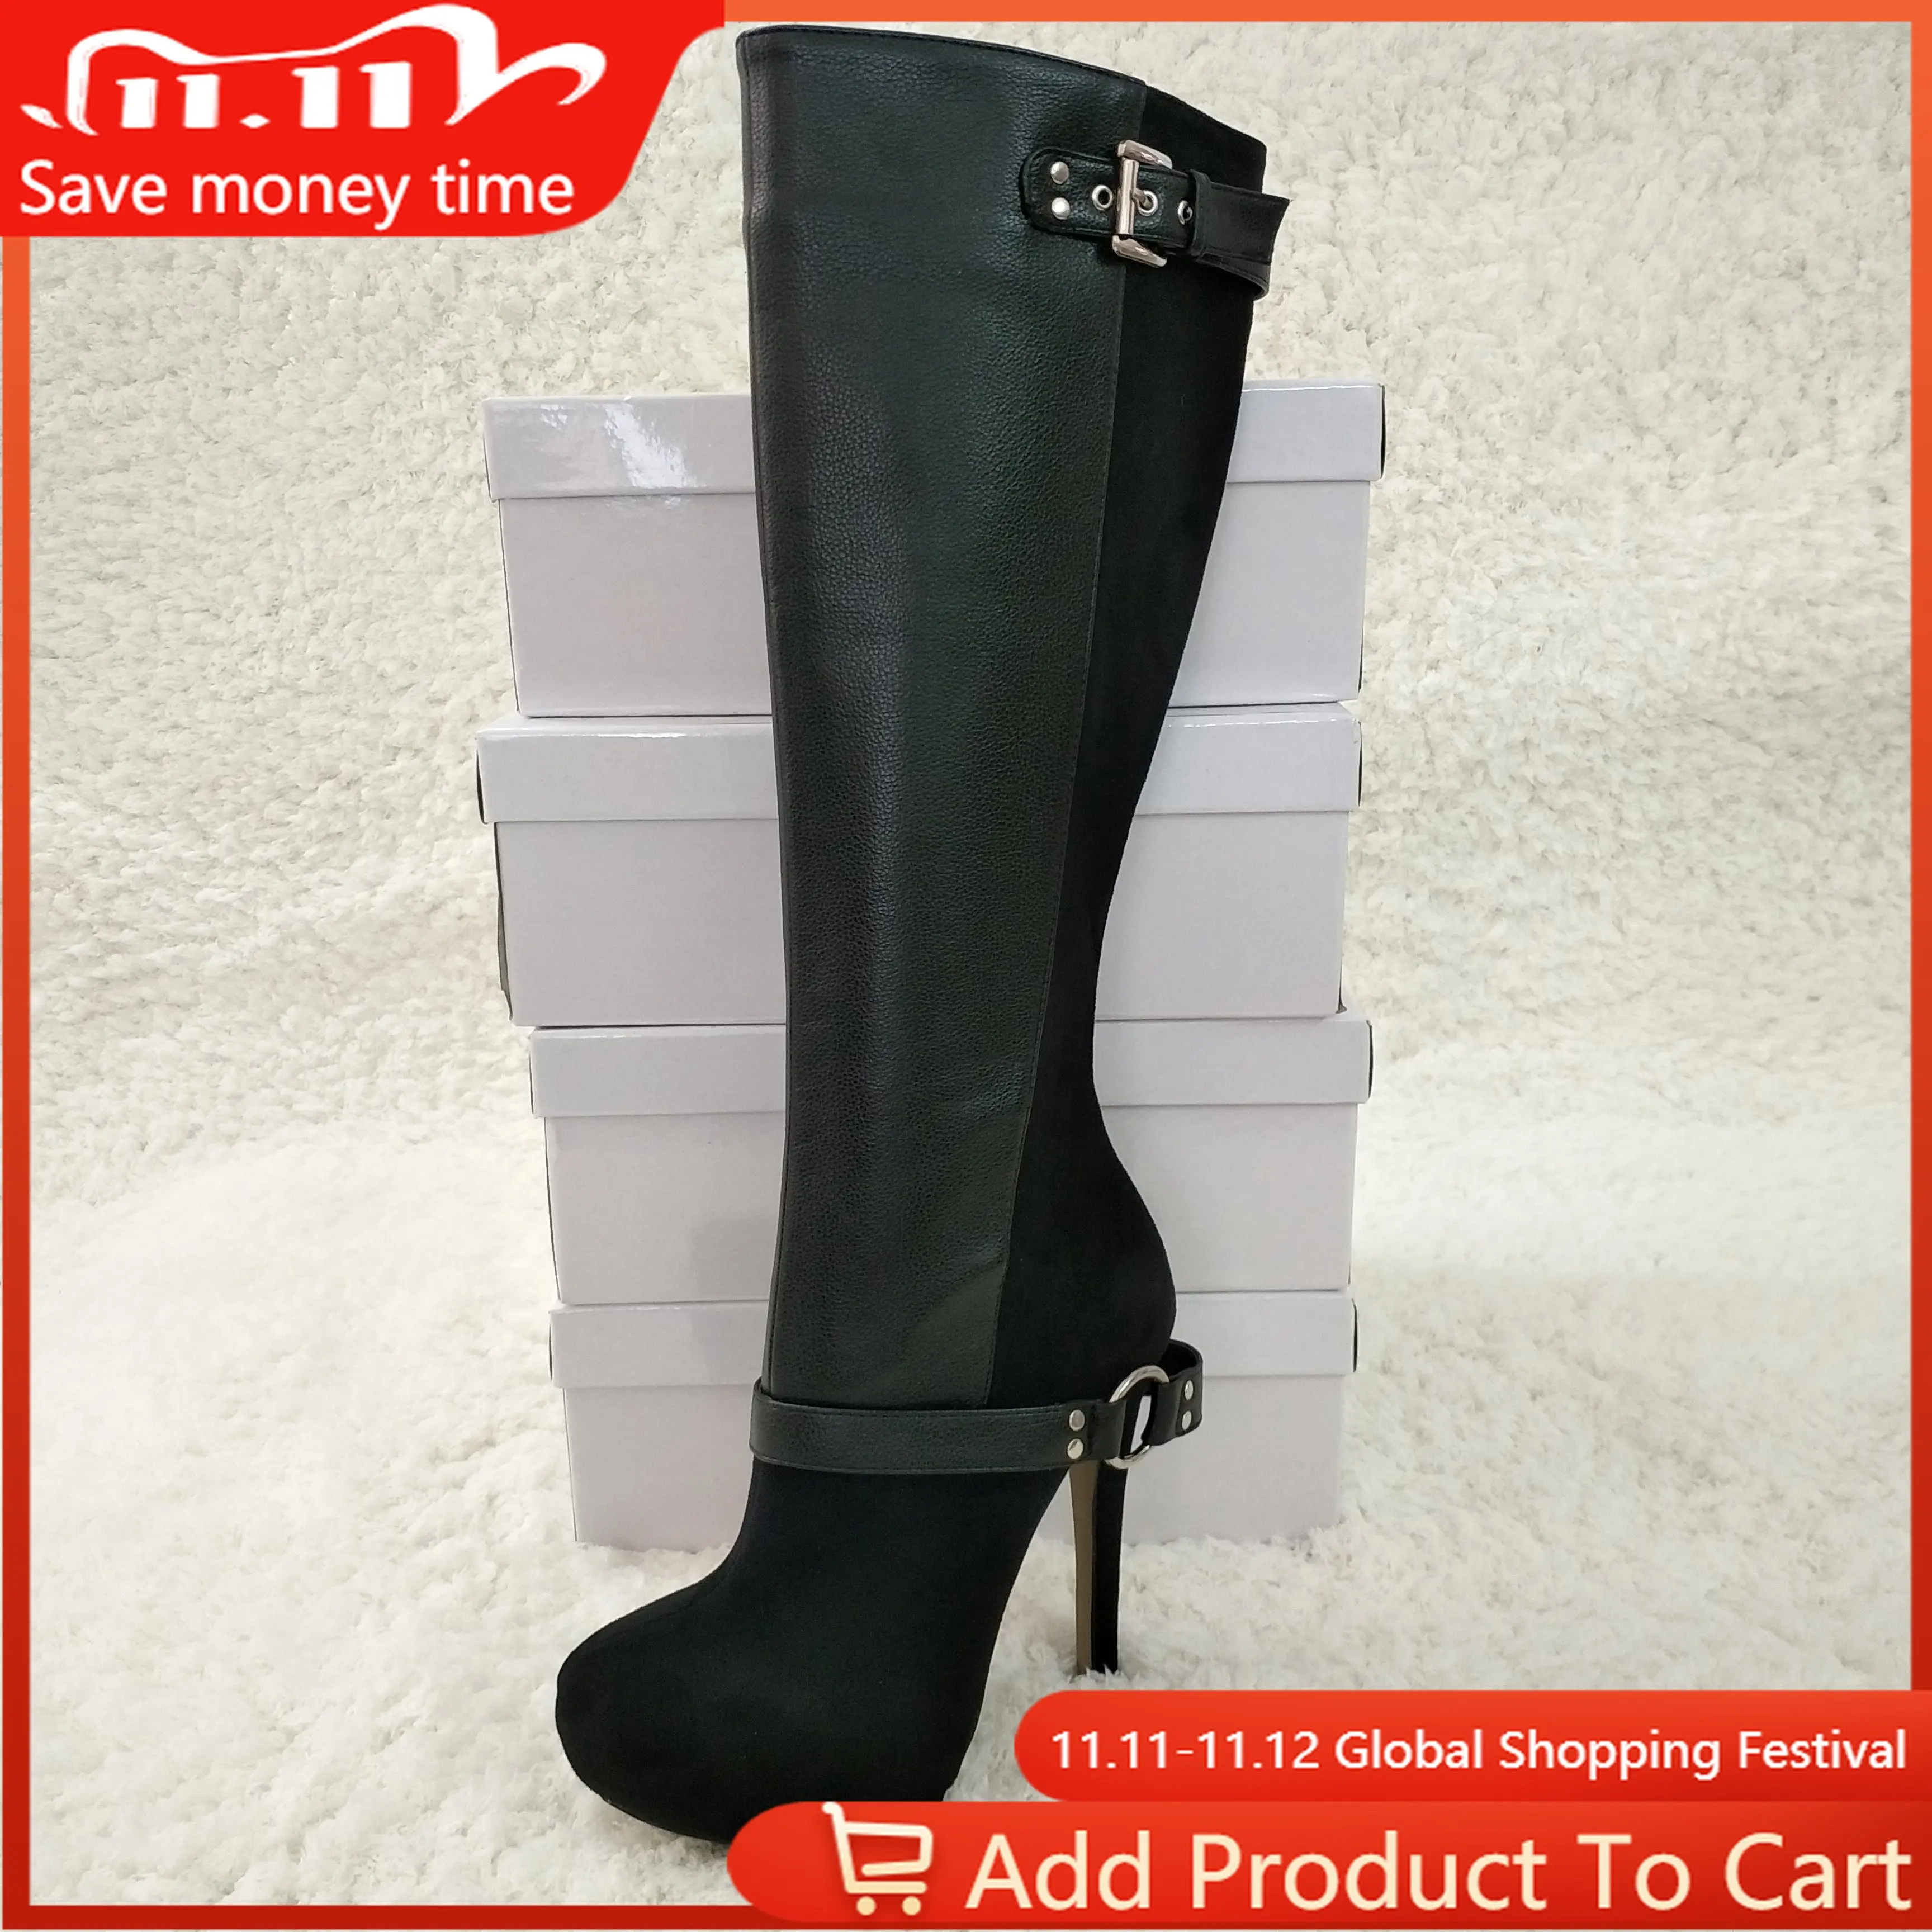 

Women Stiletto Thin High Heel Knee-High Boot Round Toe Platform Buckle Sexy Fashion Evening Dress Party Lady Long Boots 3463bt-o